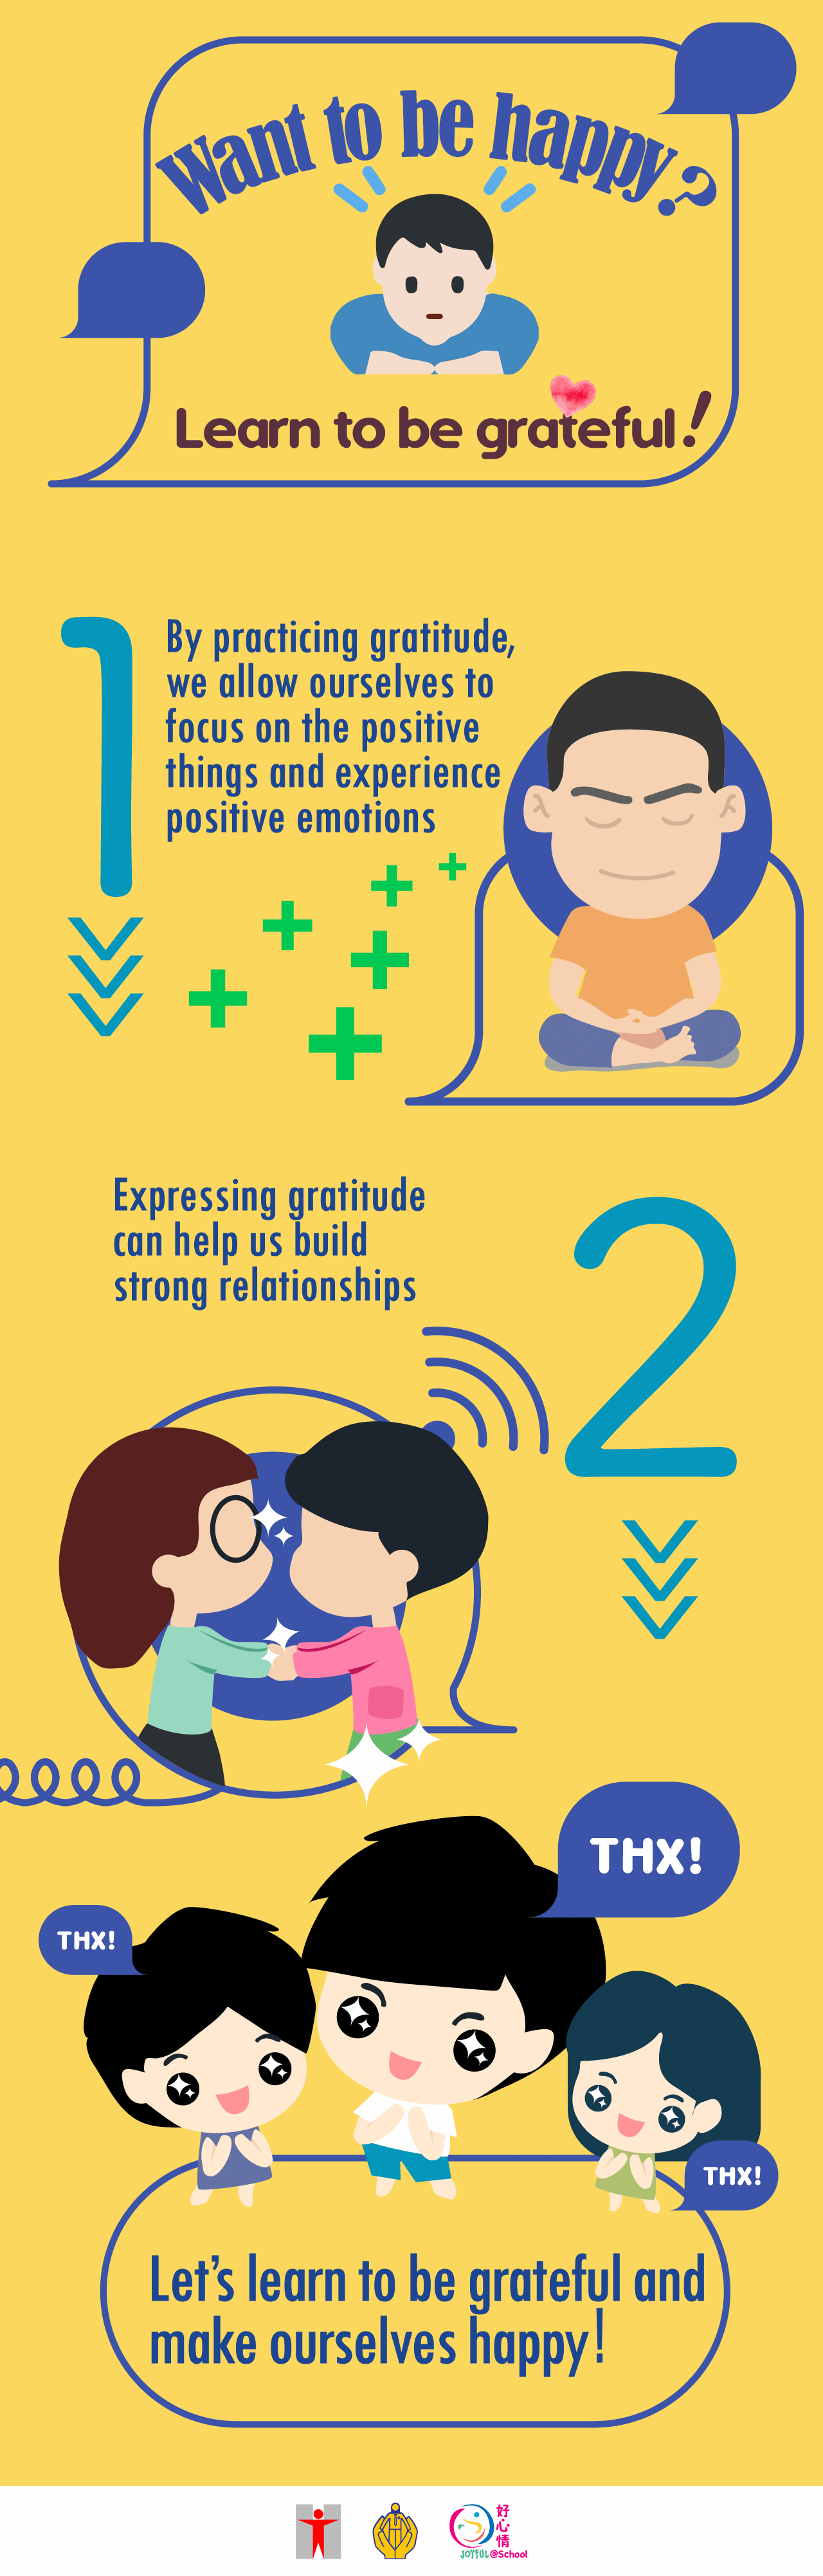 Want to be happy? Learn to be grateful! By practicing gratitude, we allow ourselves to focus on the positive things and experience positive emotions.Expressing gratitude can help us build strong relationships.Let’s learn to be grateful and make ourselves happy!